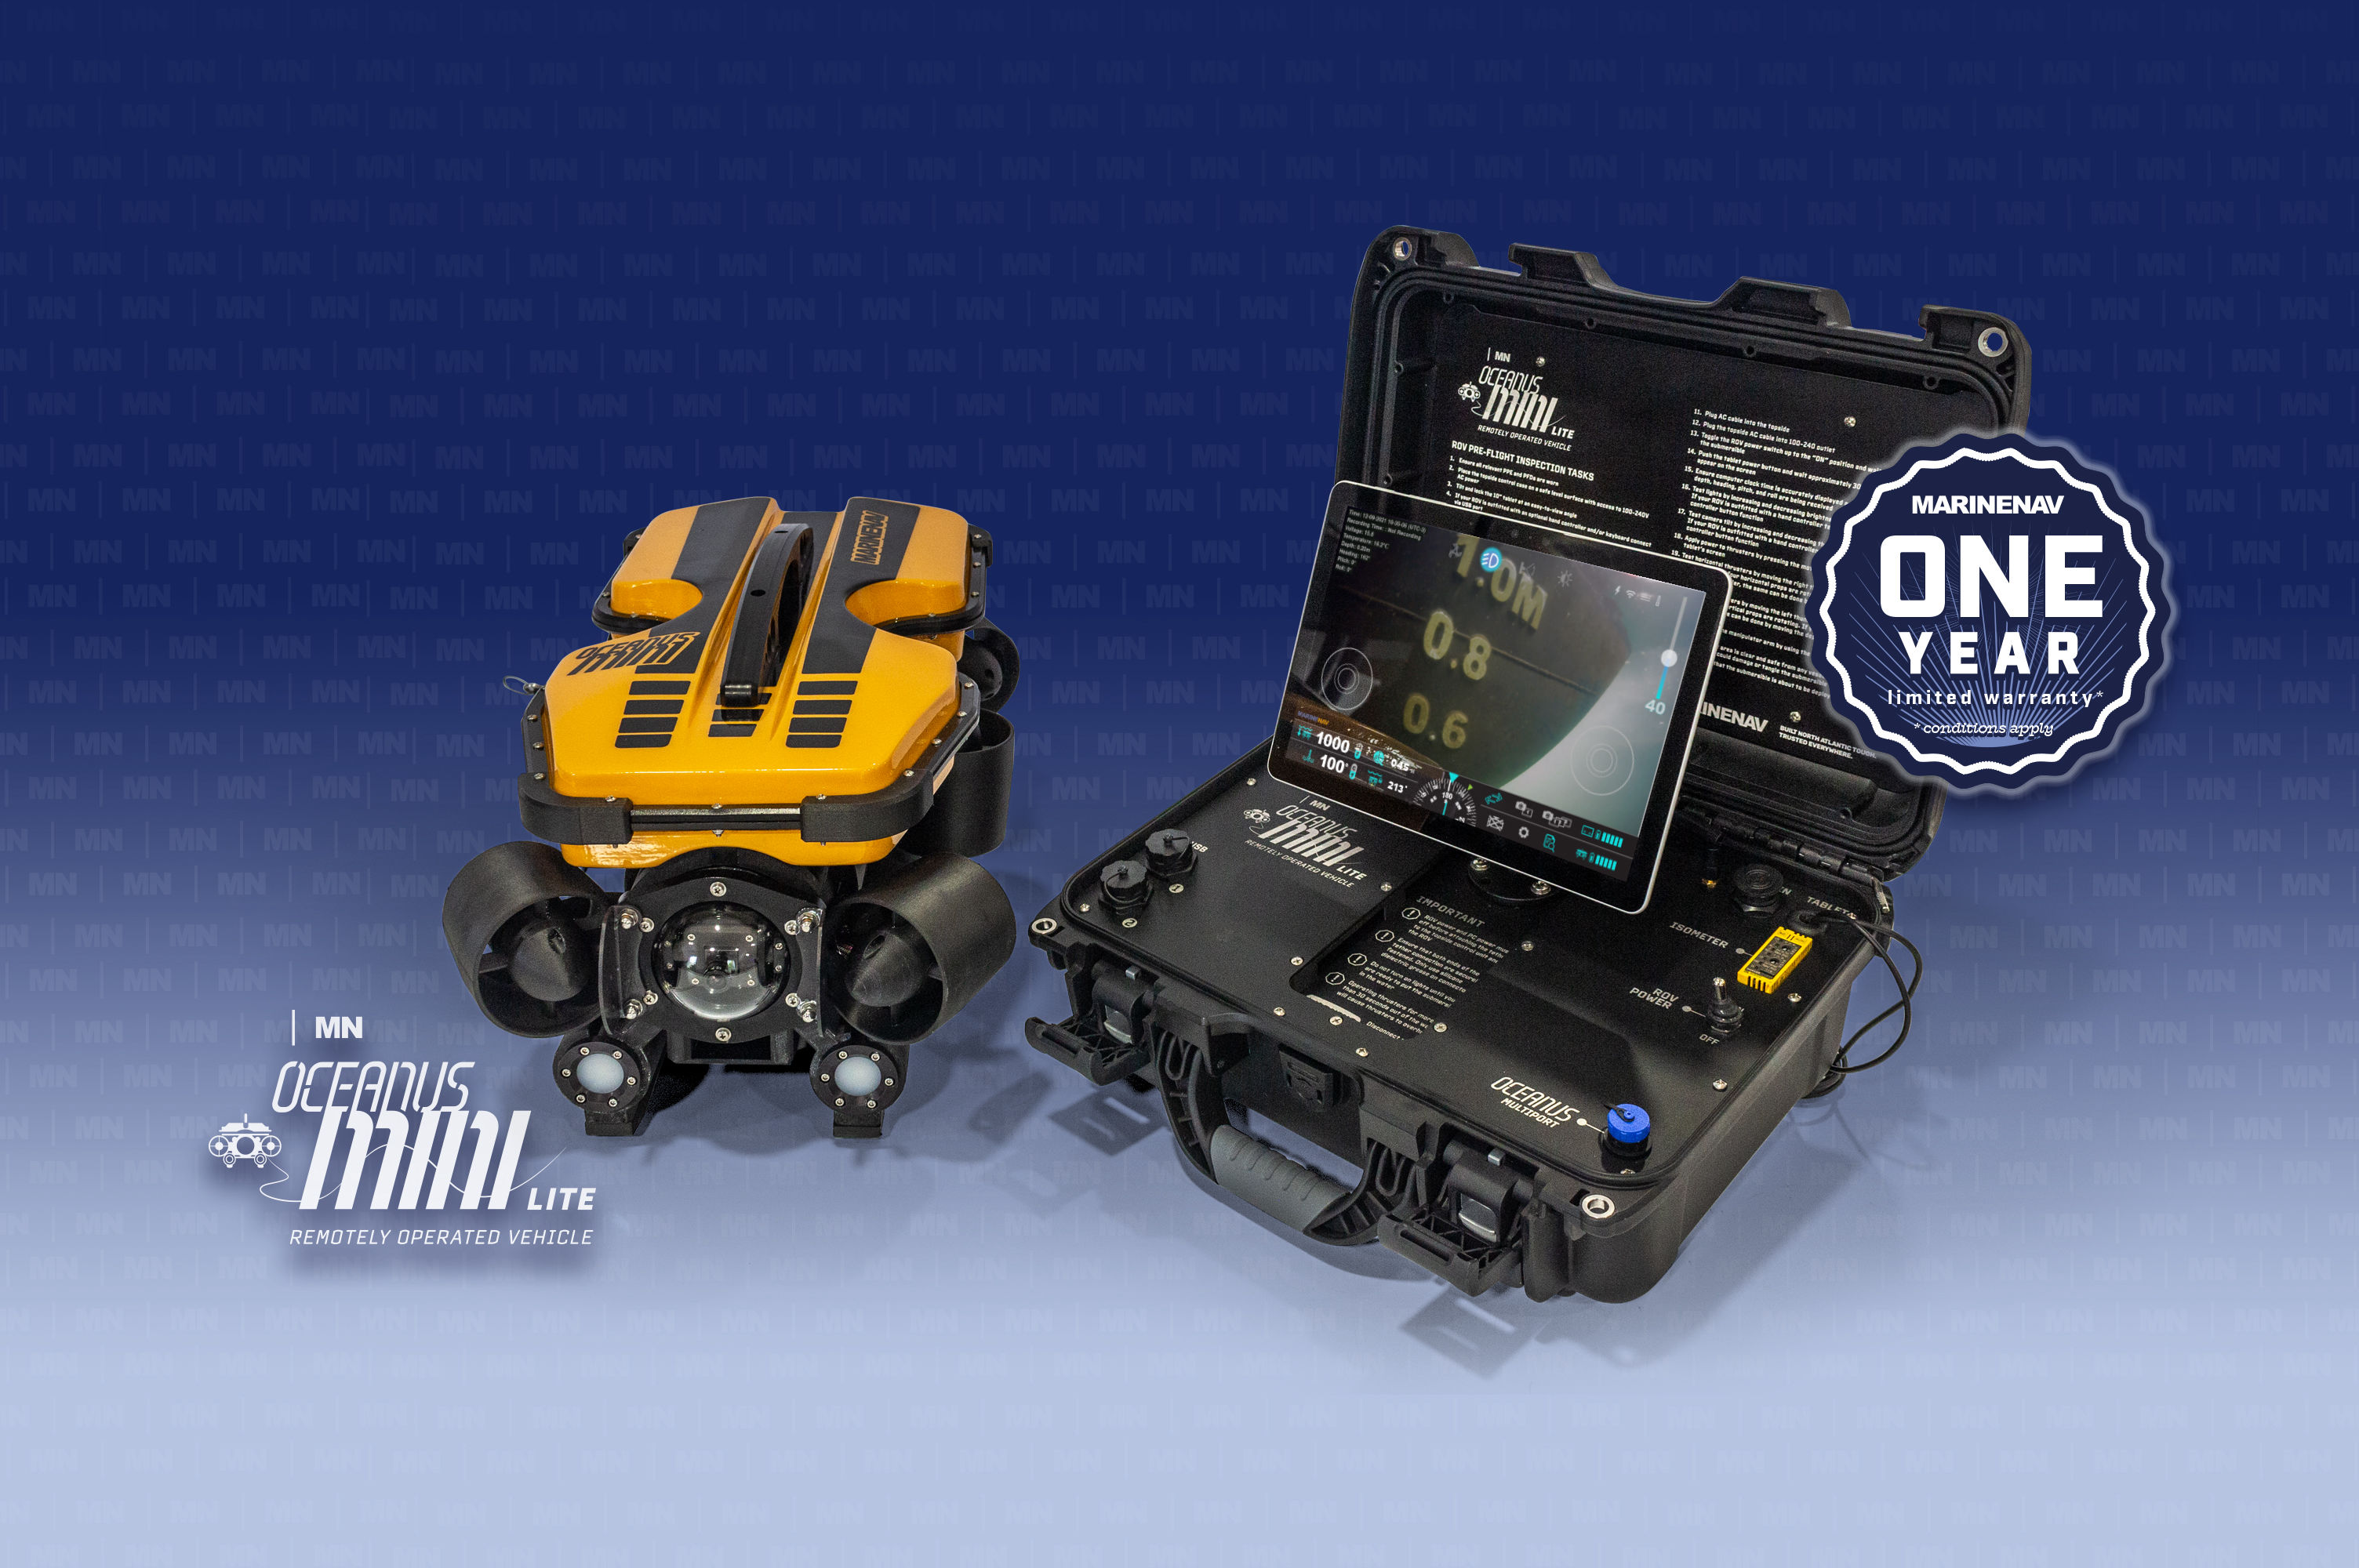 The Oceanus Mini system includes the Mini ROV, topside control case and standard Oceanus Hand Controller (v2.1)